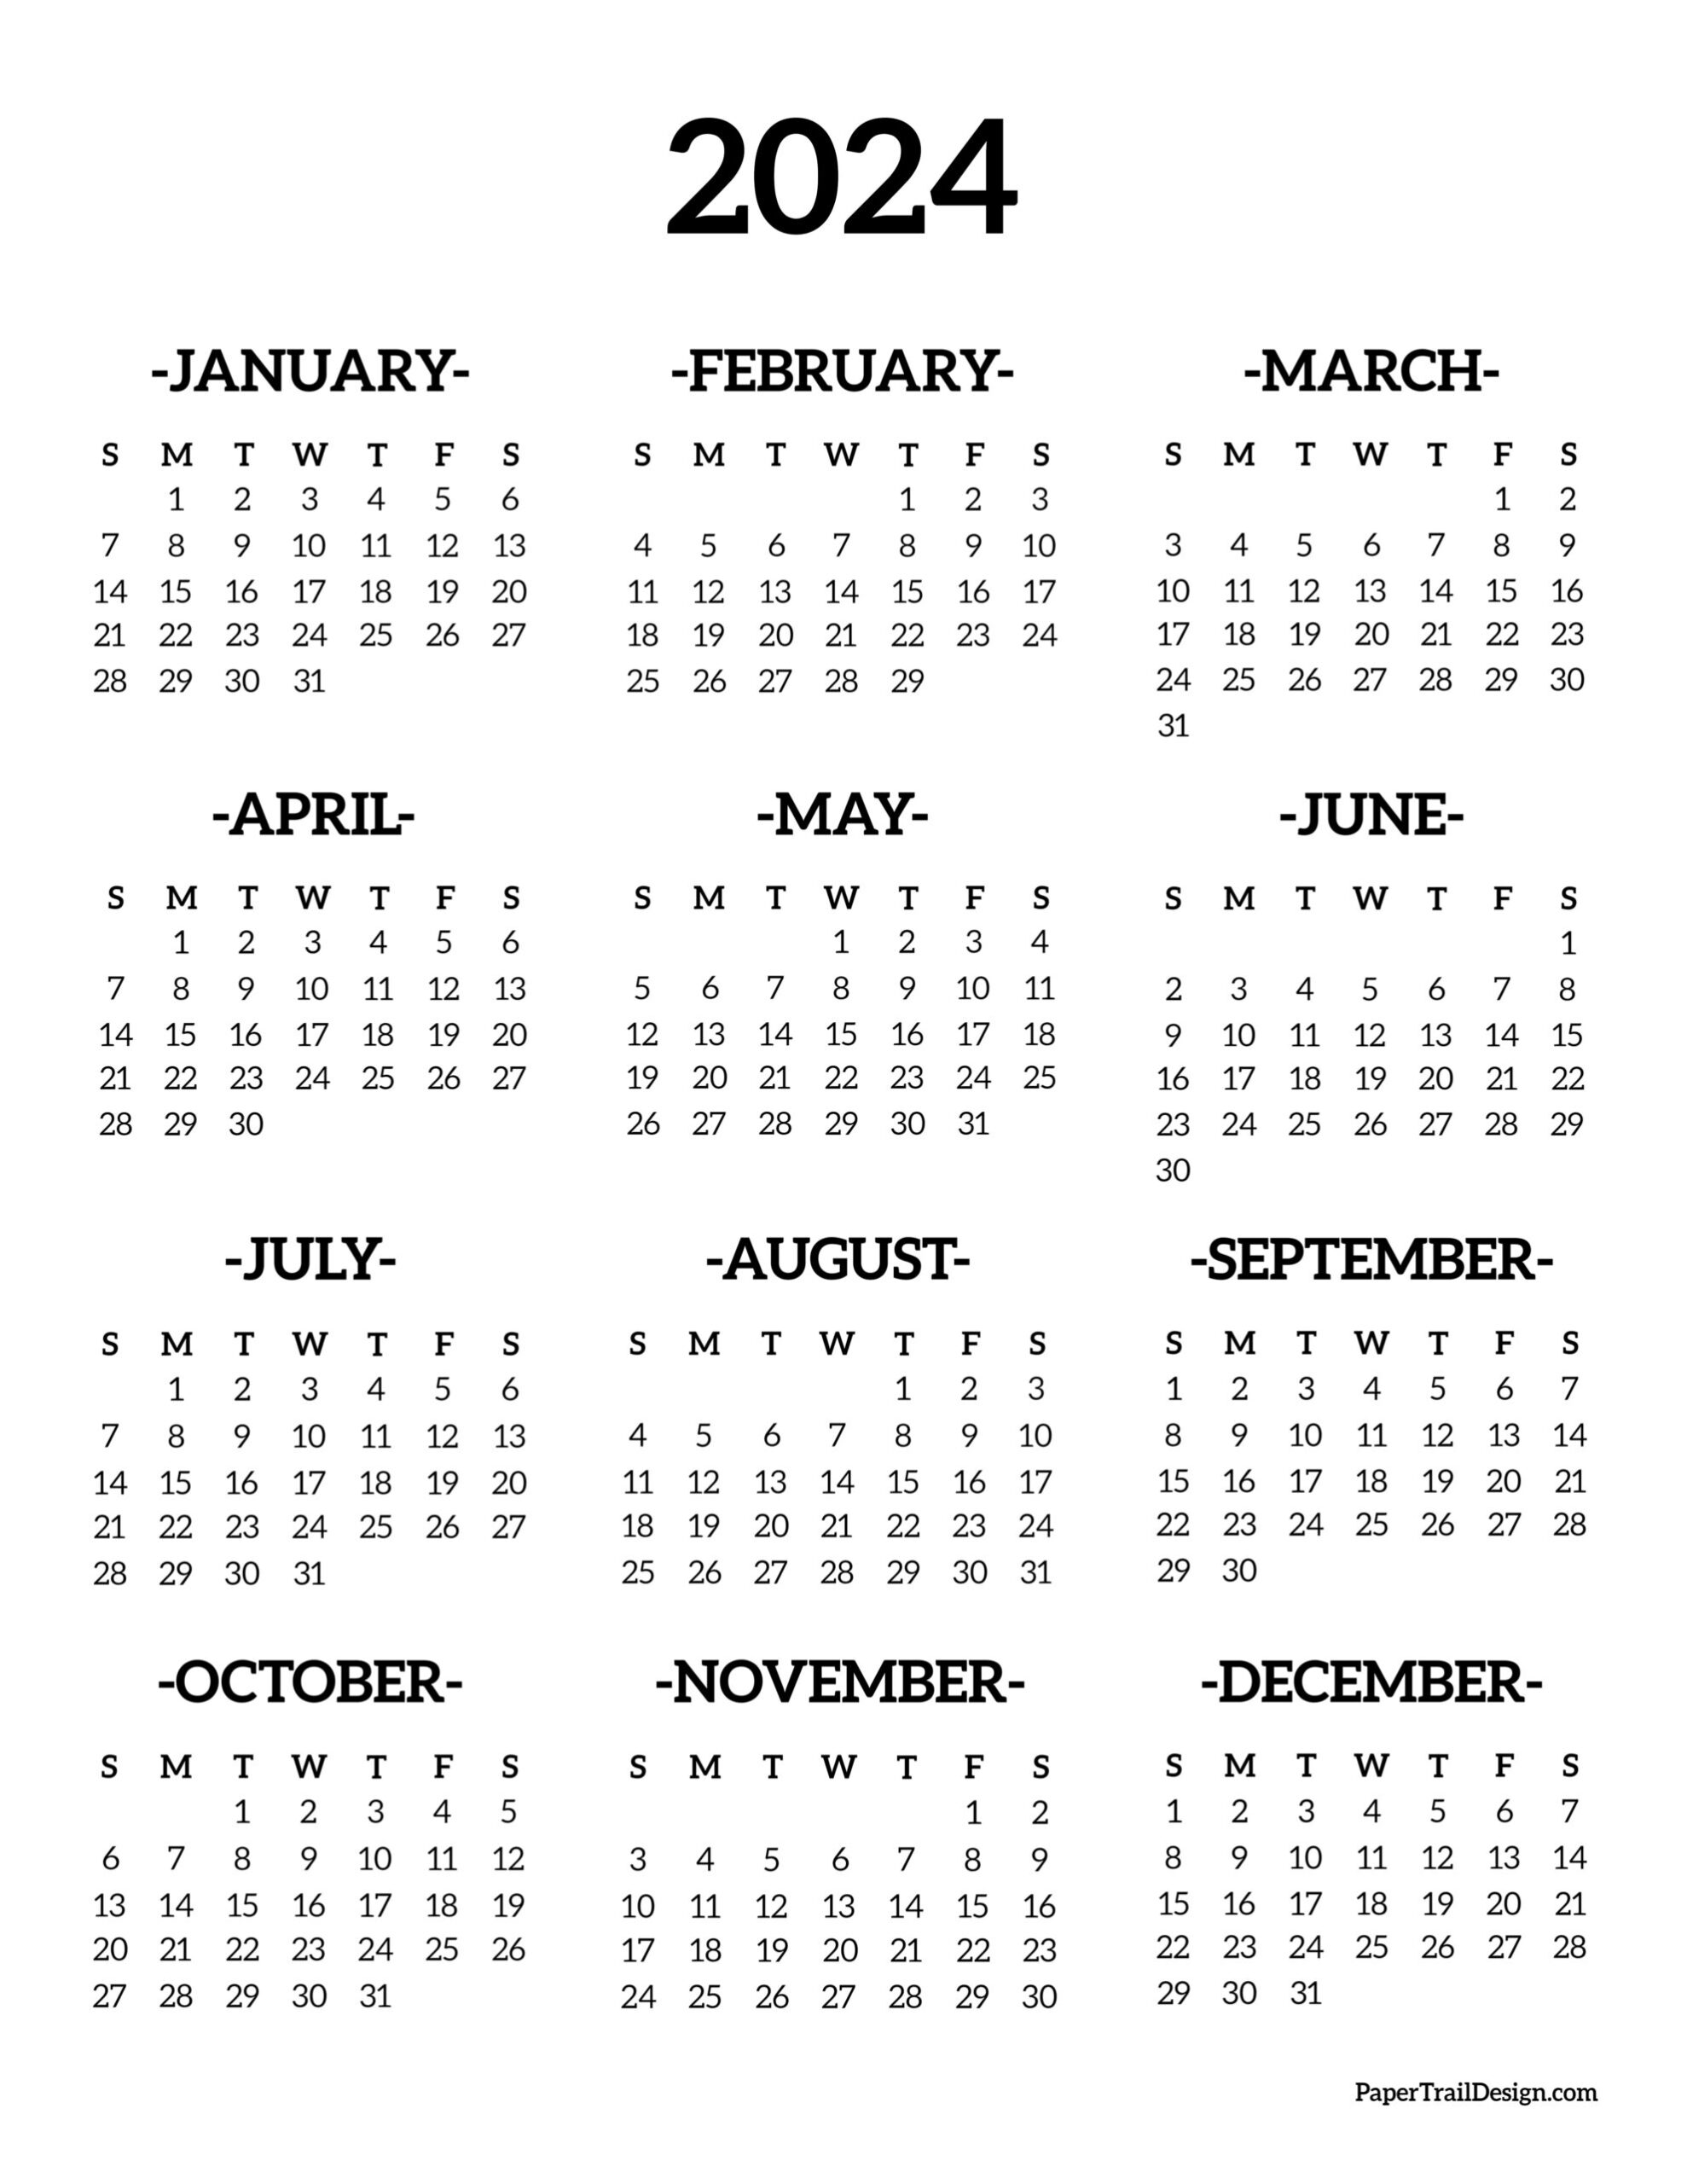 Calendar 2024 Printable One Page - Paper Trail Design for Free Printable Yearly 2024 Calendar